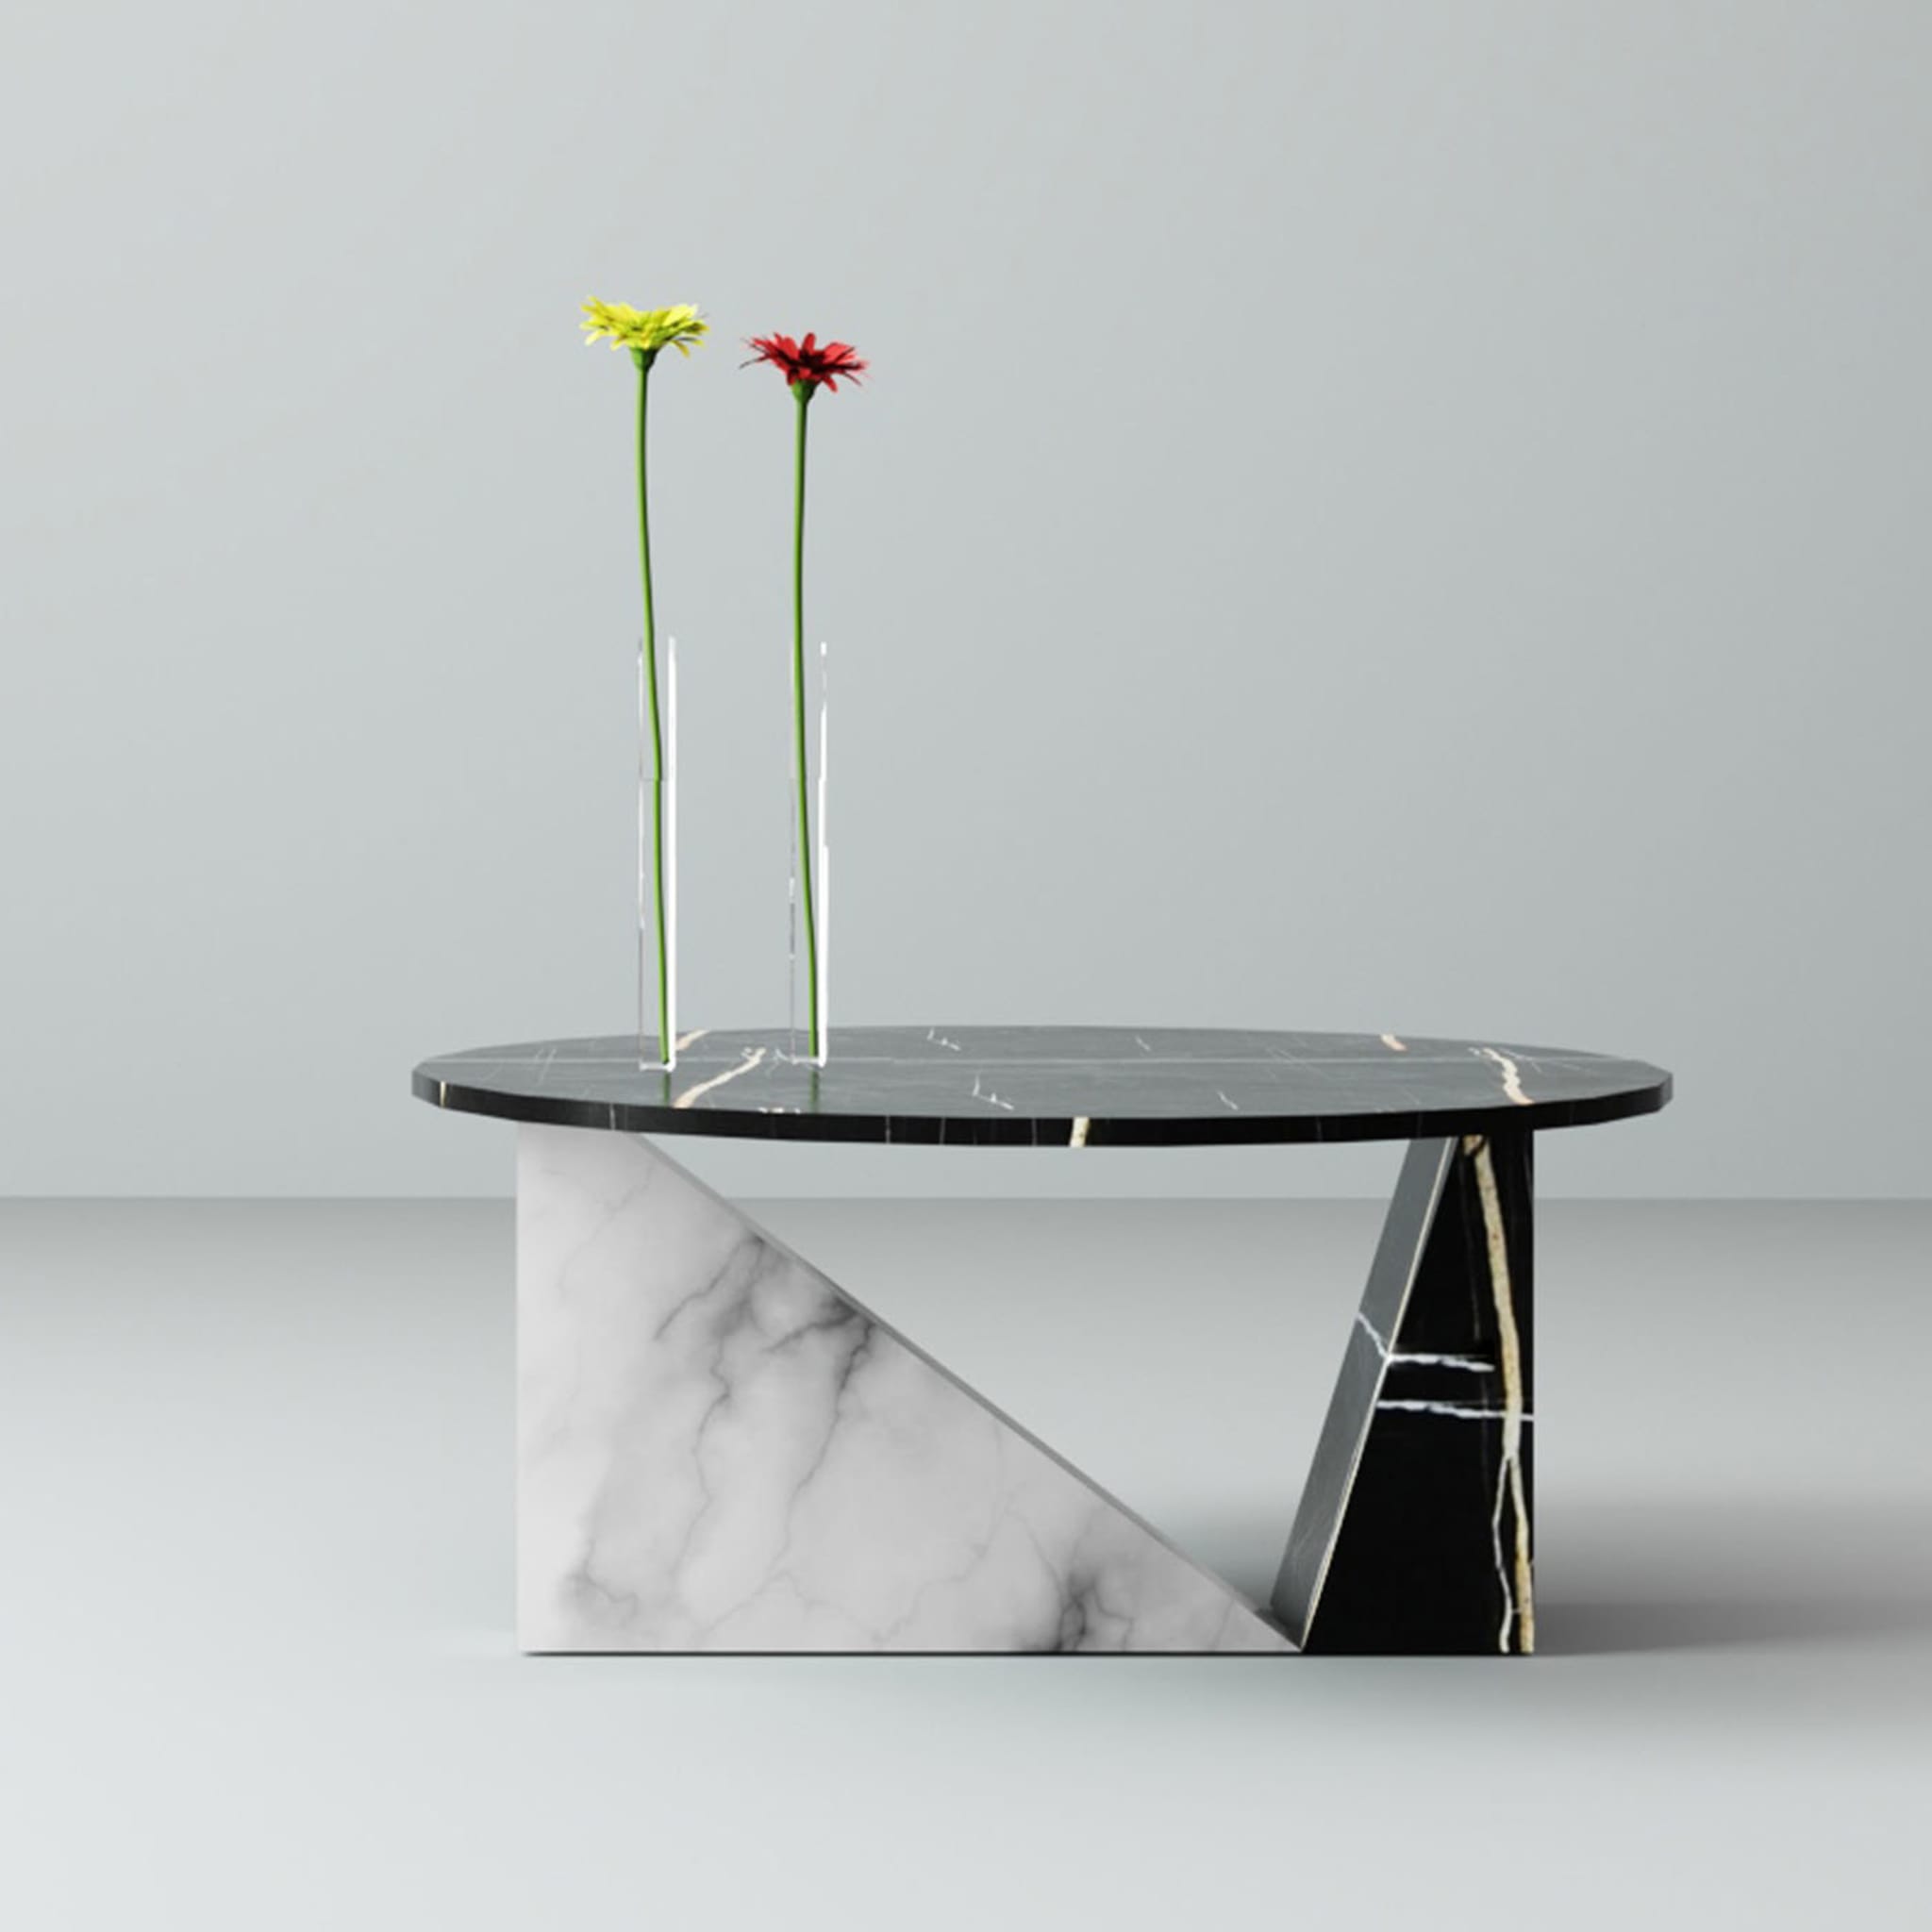 Dieus Table in White Carrara and Sahara Noir Marbles by sid&sign - Alternative view 1